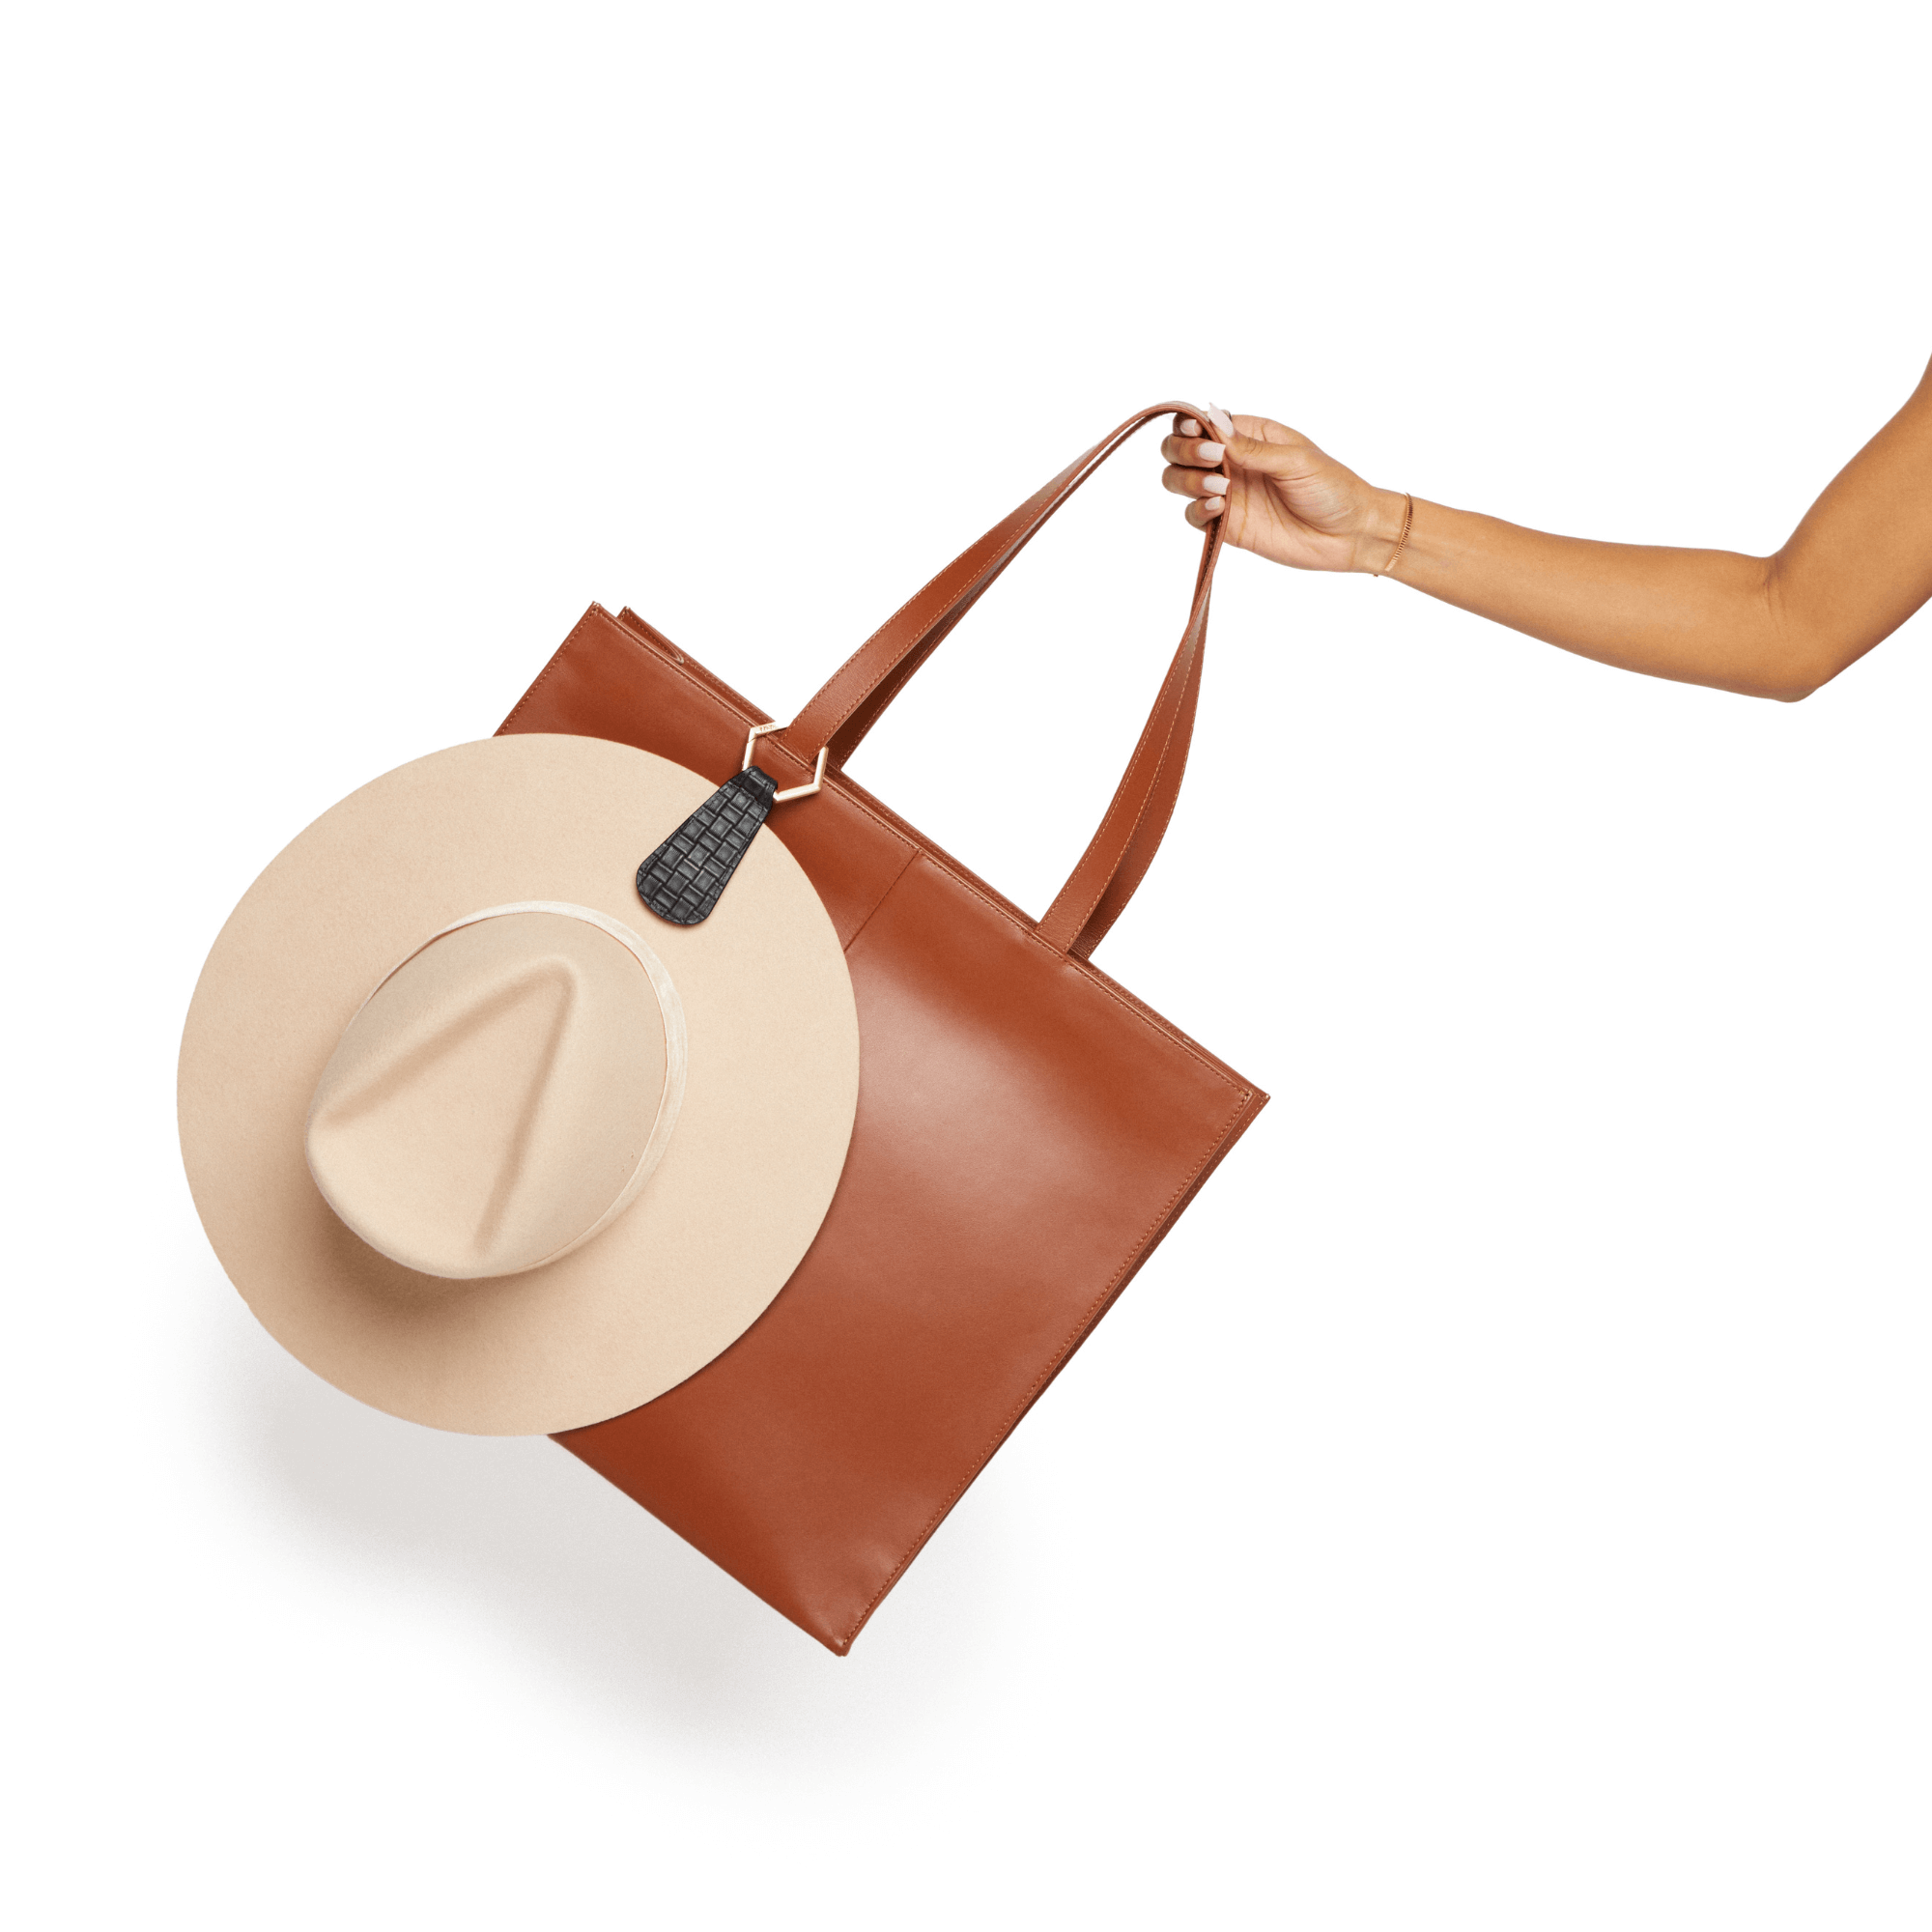 The TOPTOTE Hat Clip Will Completely Change How You Travel With a Hat